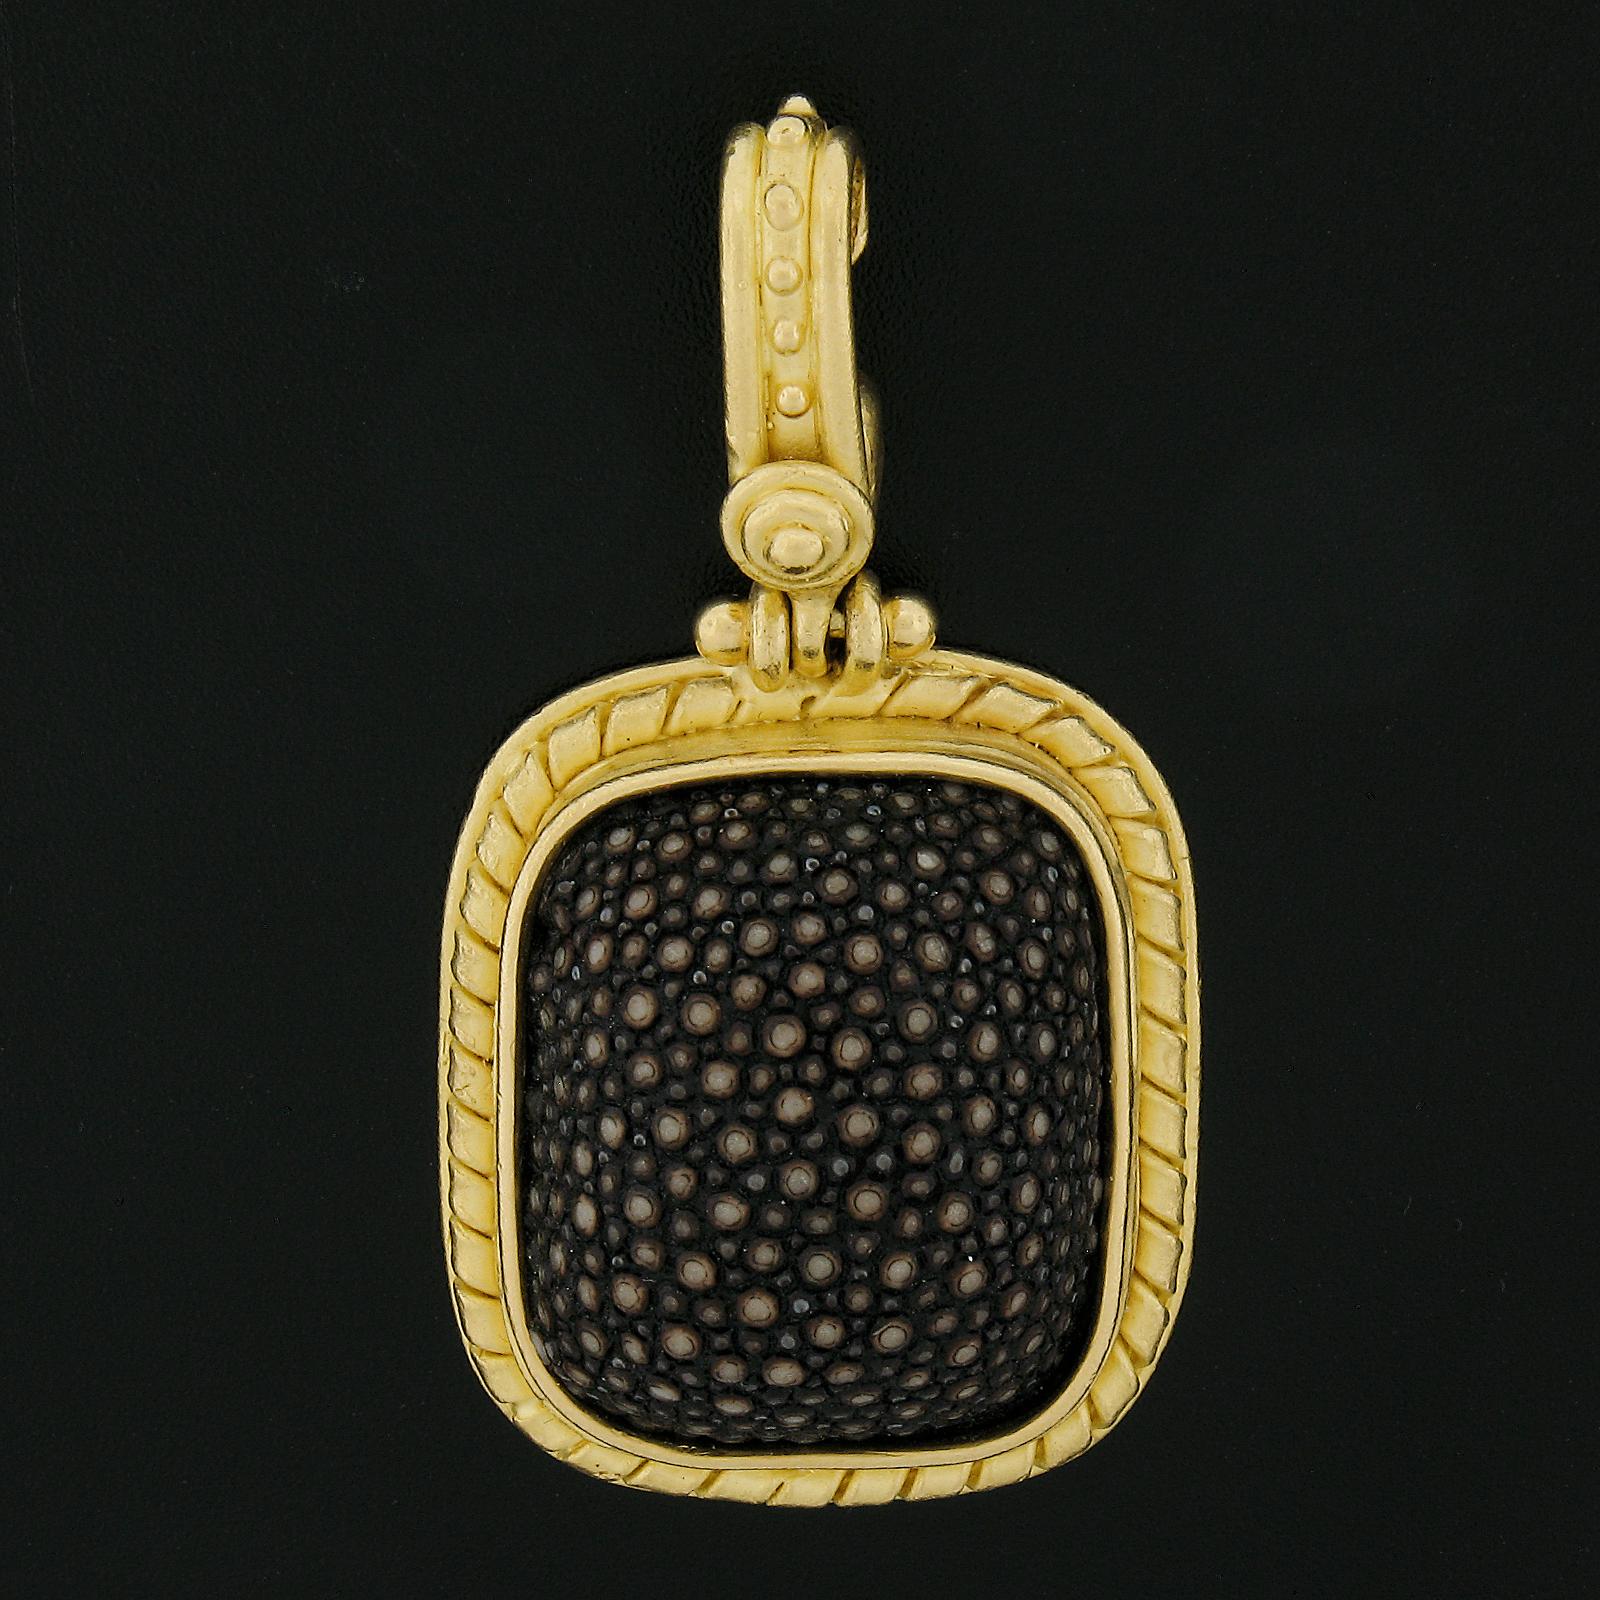 Material: 22K Solid Yellow Gold & Leather
Weight: 34.15 Grams
Pendant Height: 59mm (2.3